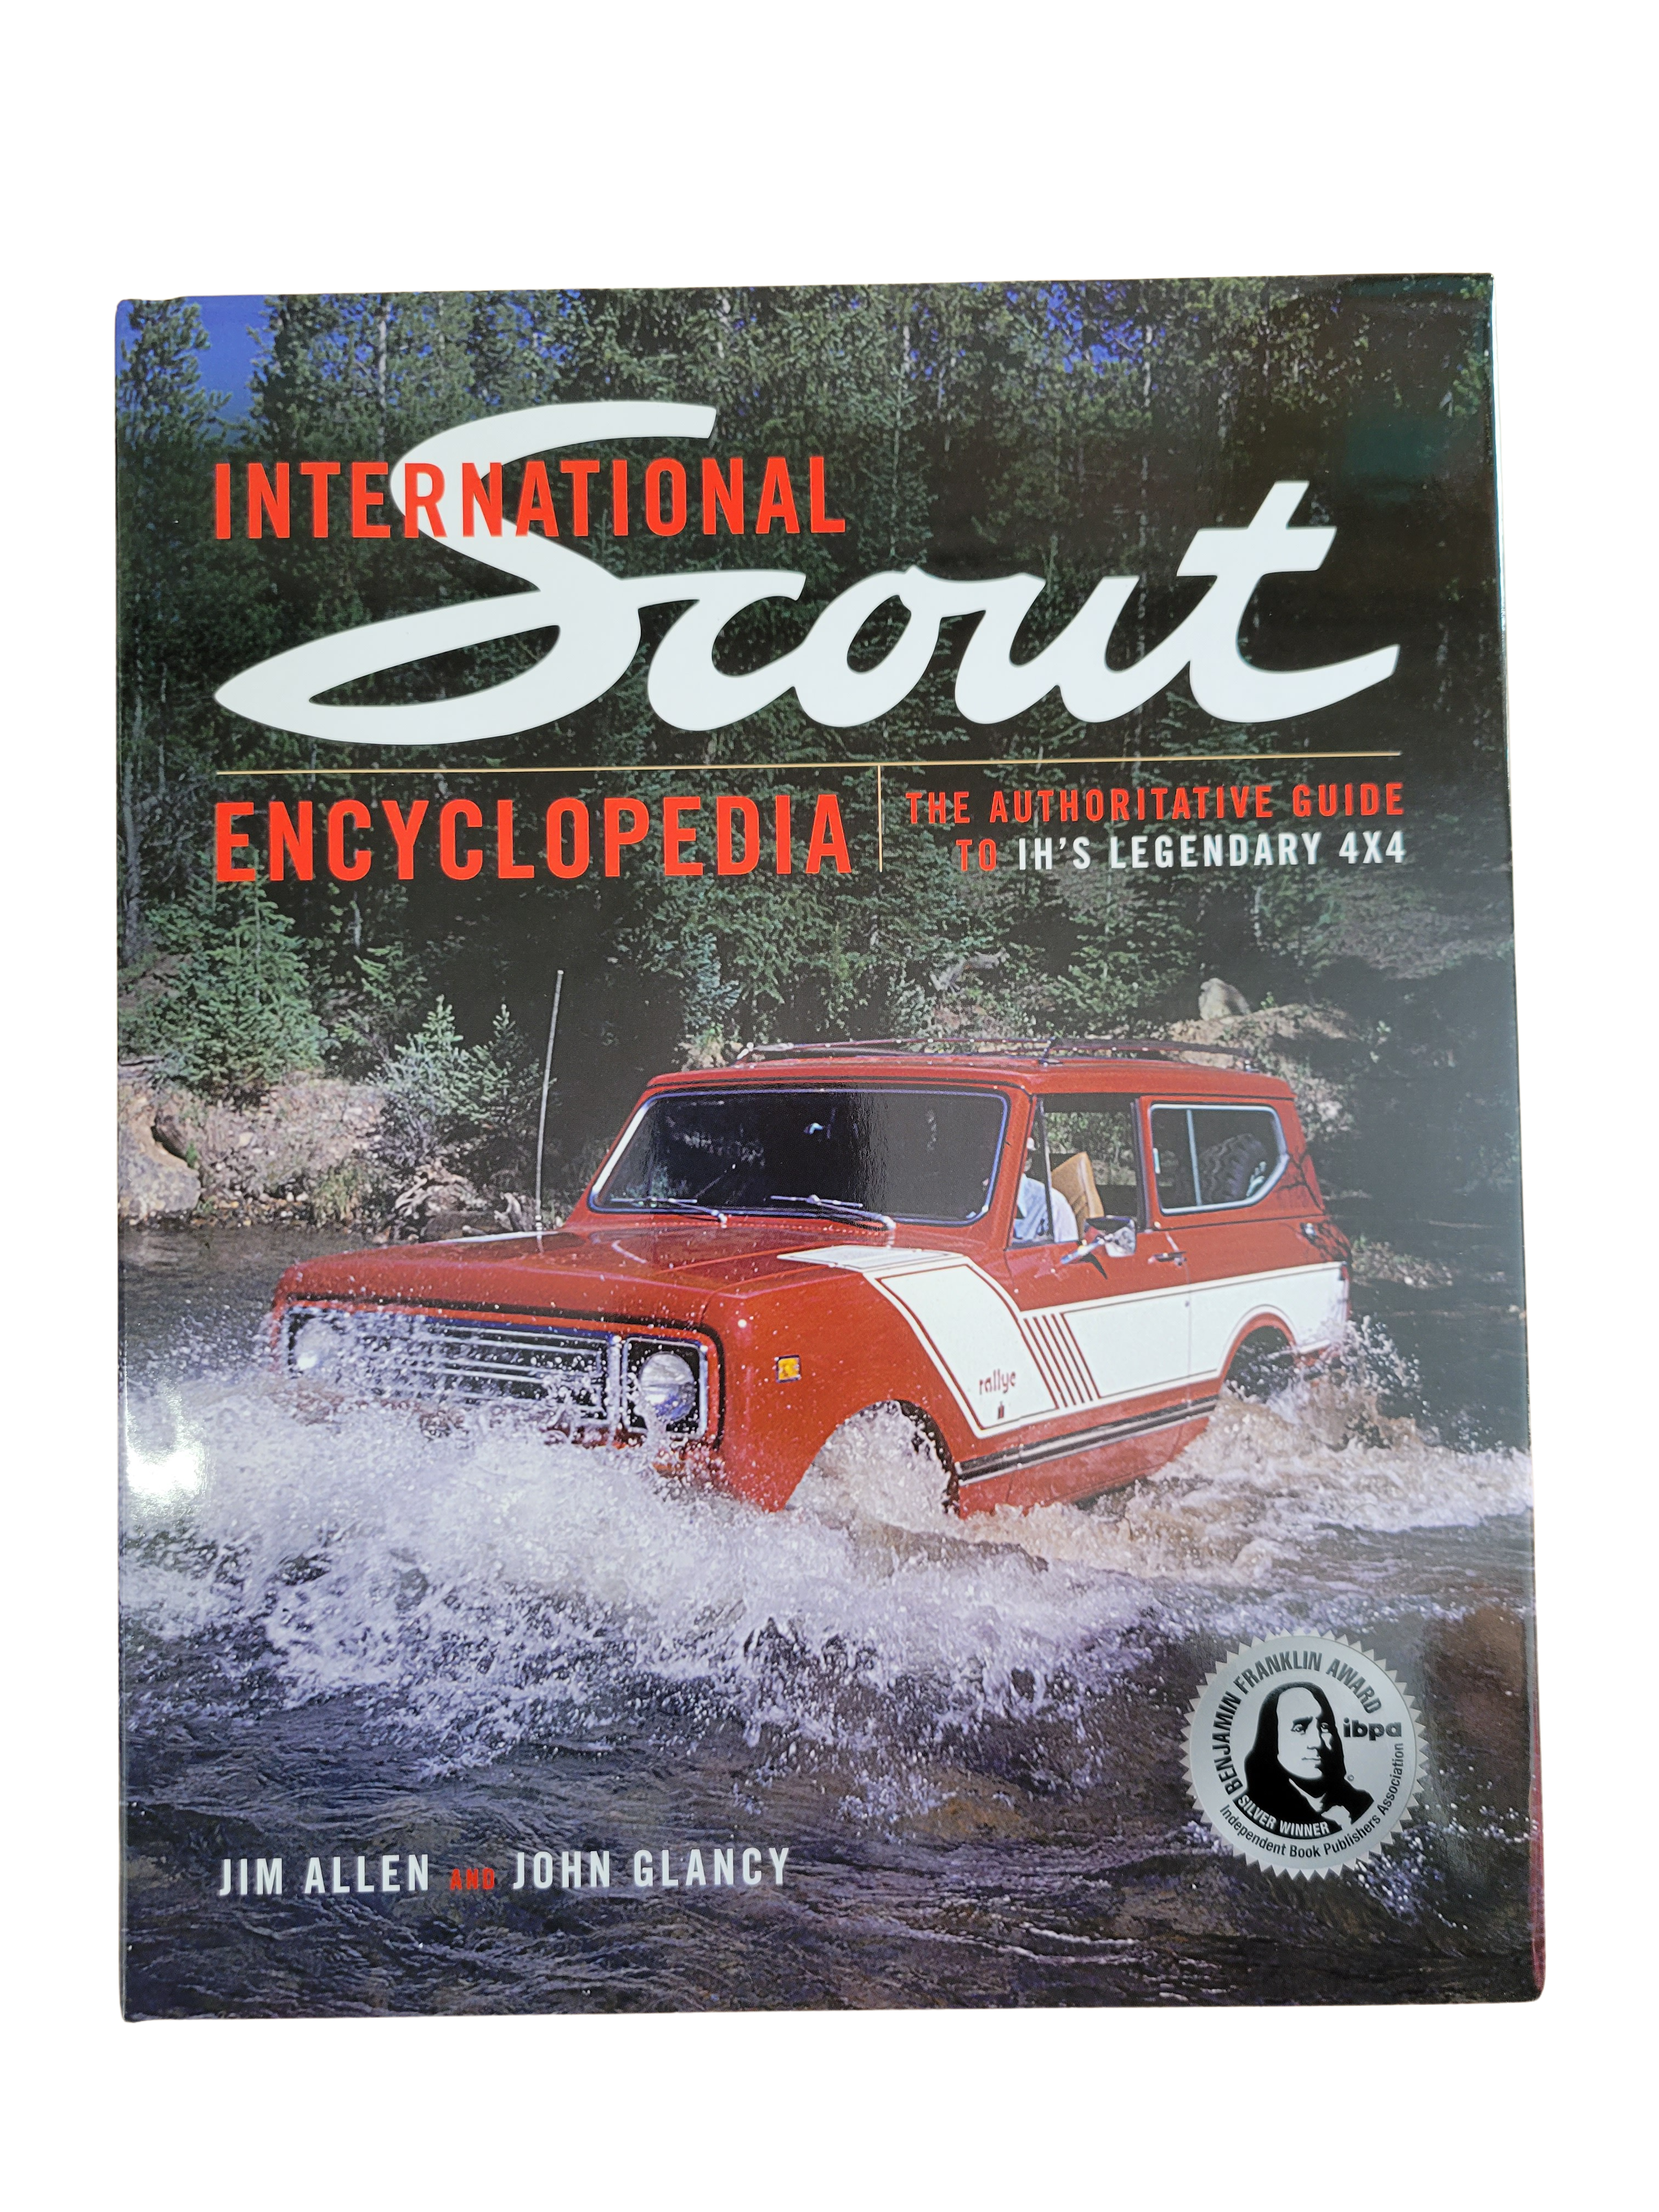 https://anythingscout.com/collections/books/products/pre-sale-ih-scout-encyclopedia